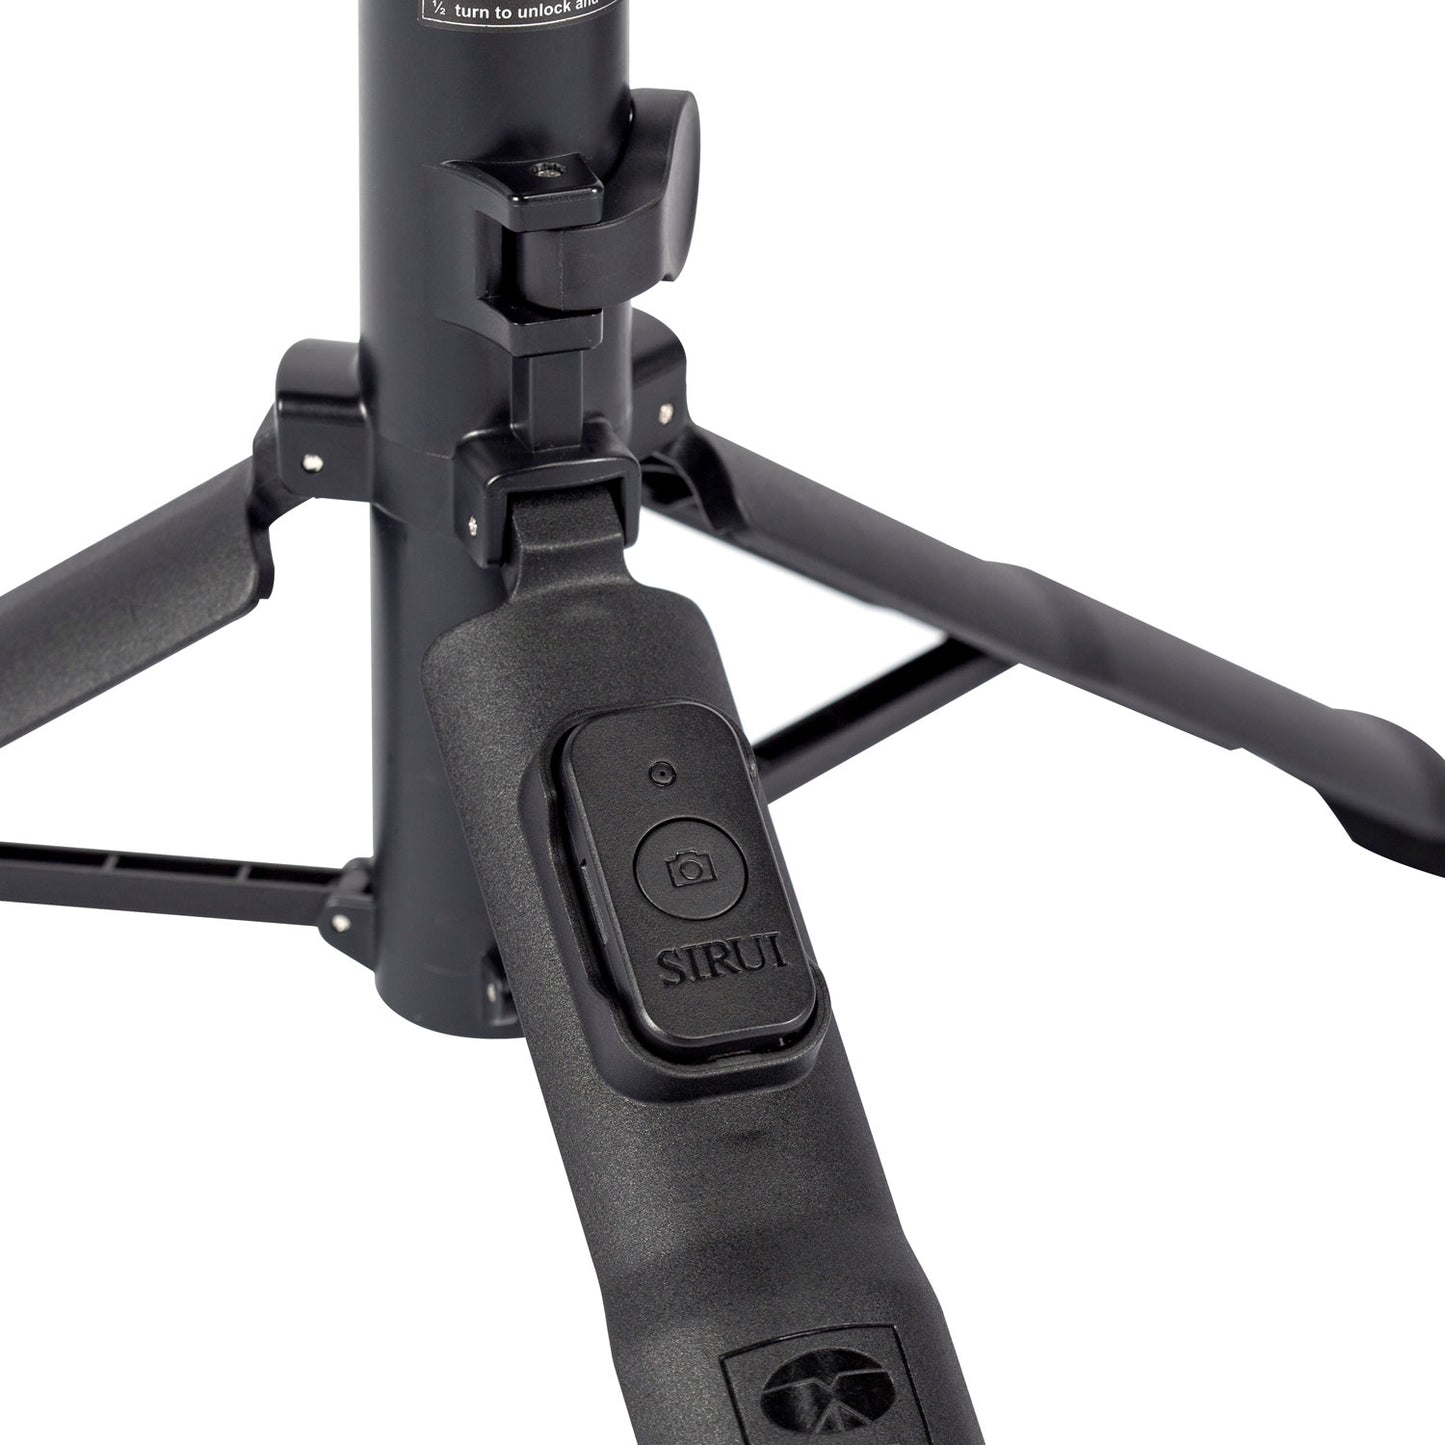 SIRUI MS-01K tripod 138cm and selfiestick for Smartphones and Action-Cams